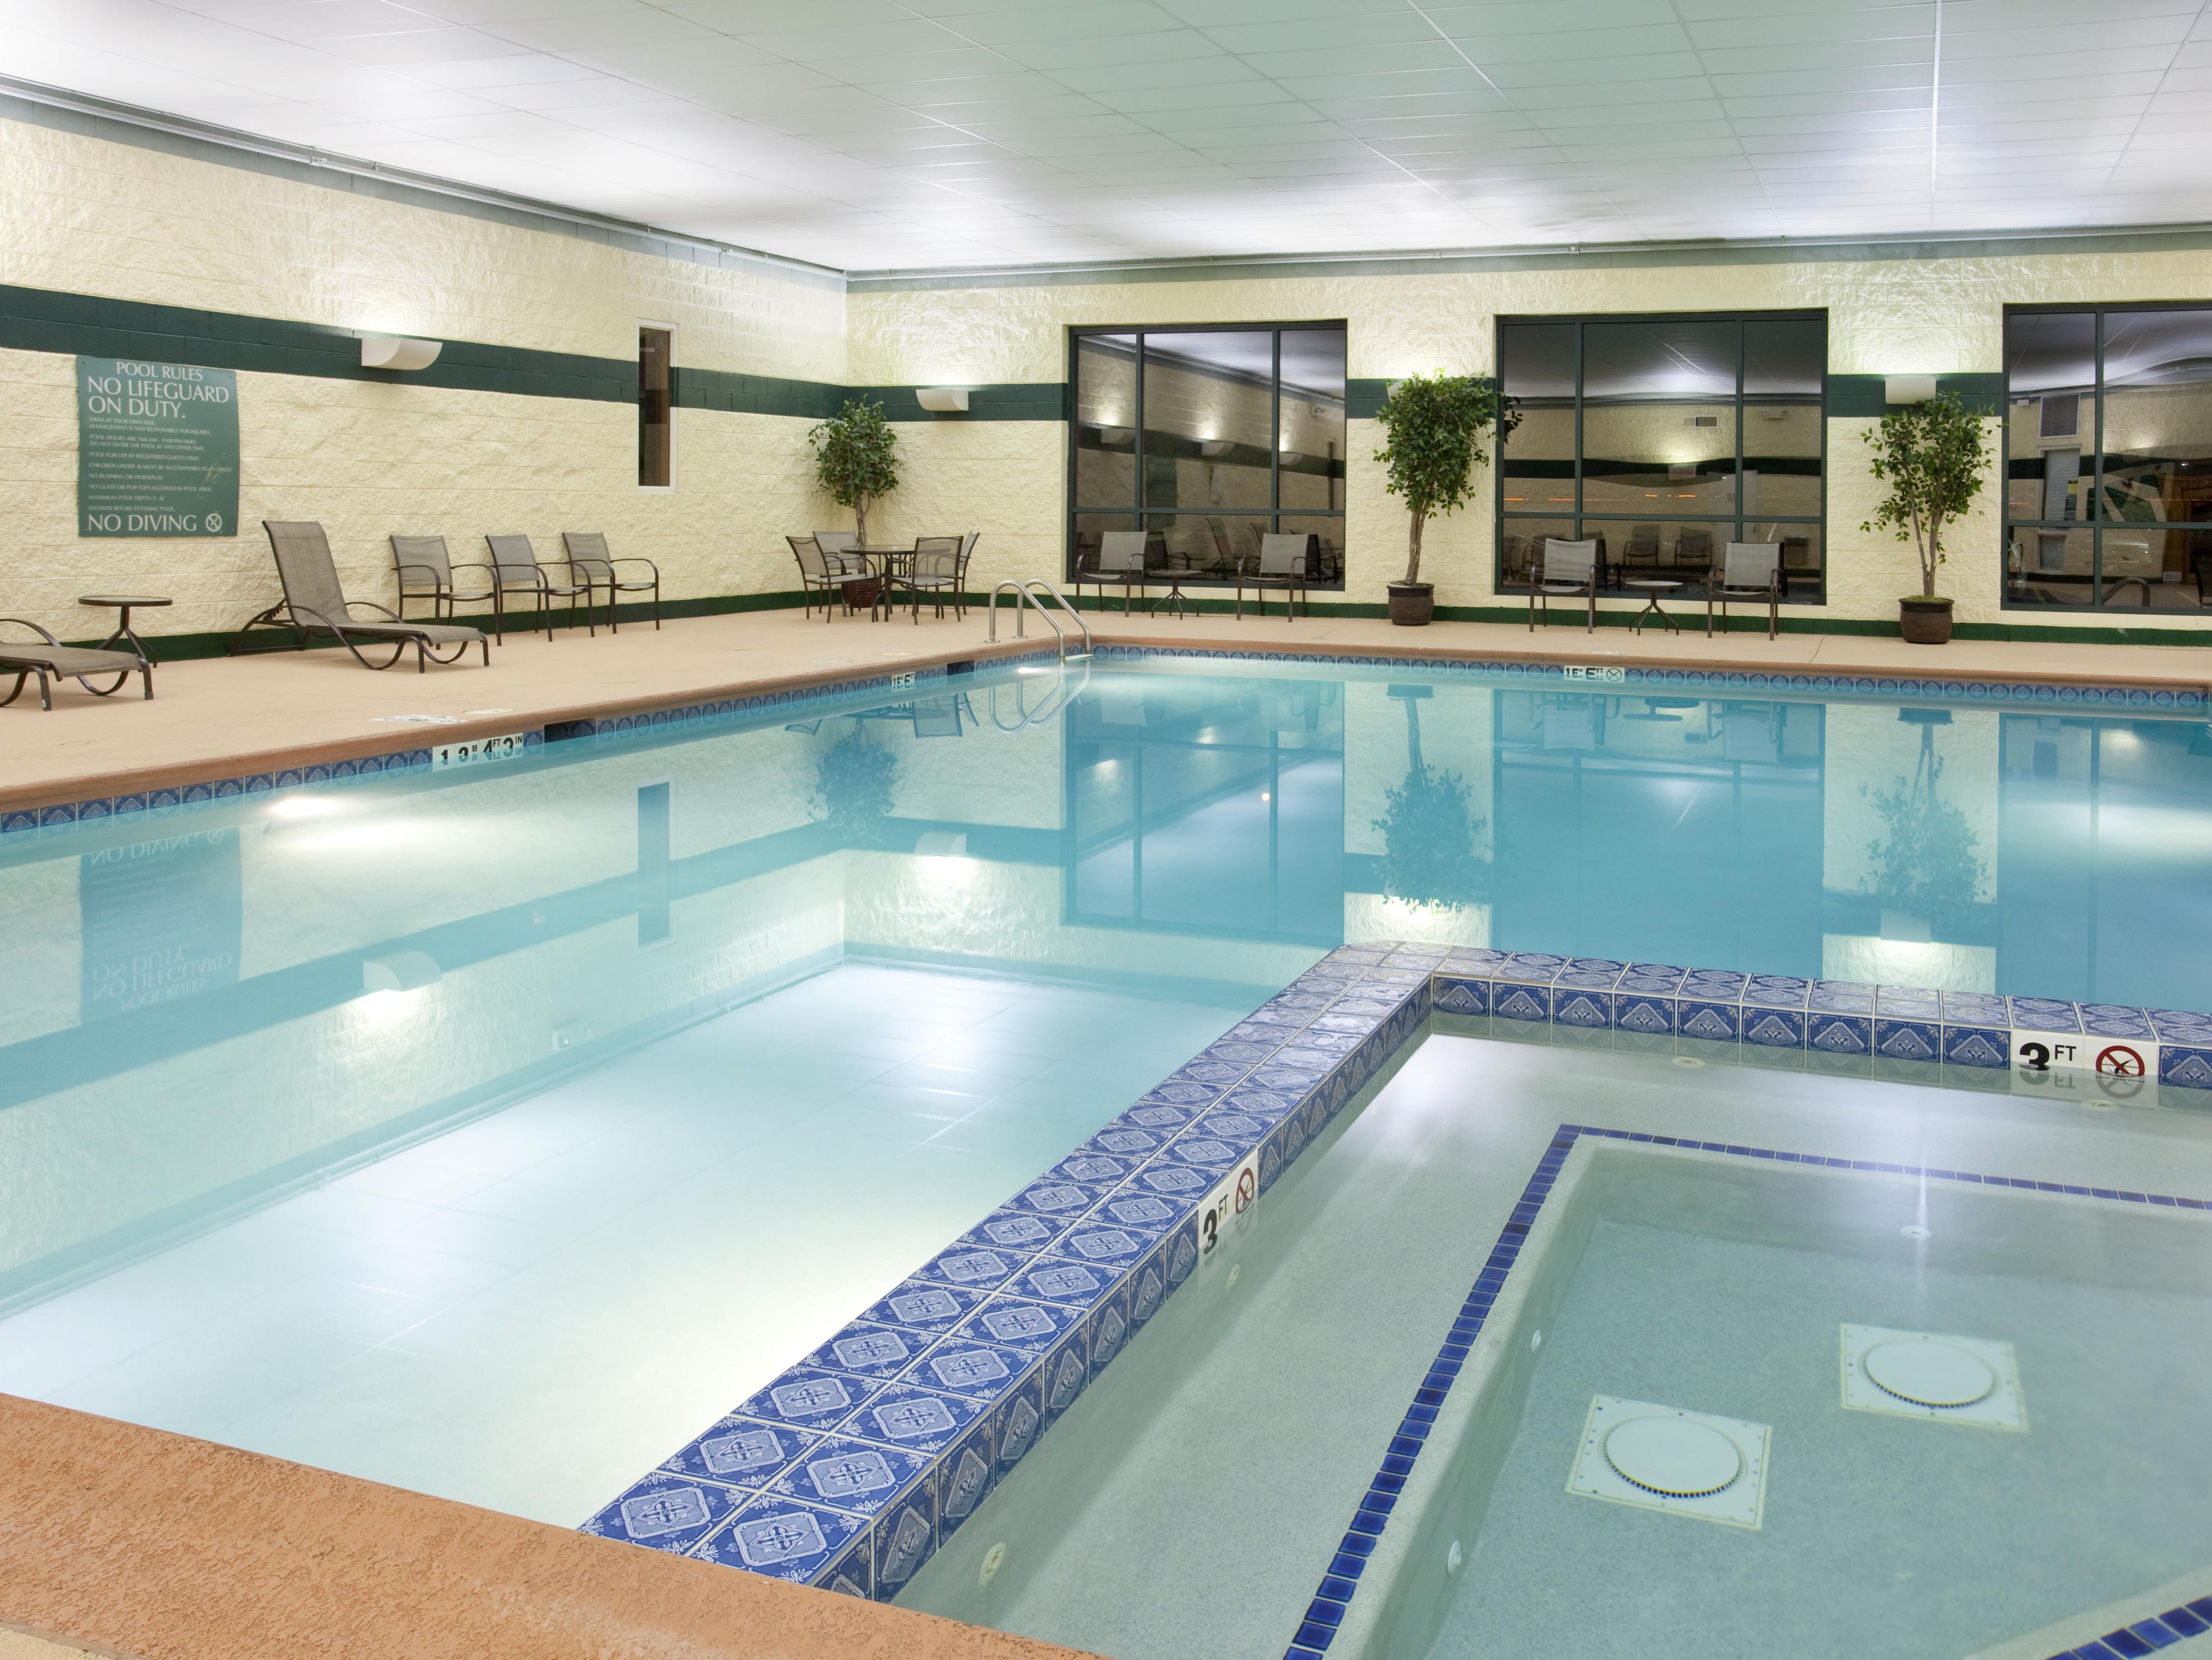 Start or end your day (or both) with a few laps in our spacious indoor pool, or take the edge off while relaxing in the whirlpool. In need of extra Vitamin D? Just step outside where you can catch up on your “Z’s” or enjoy a good book or on our patio. Splash on!